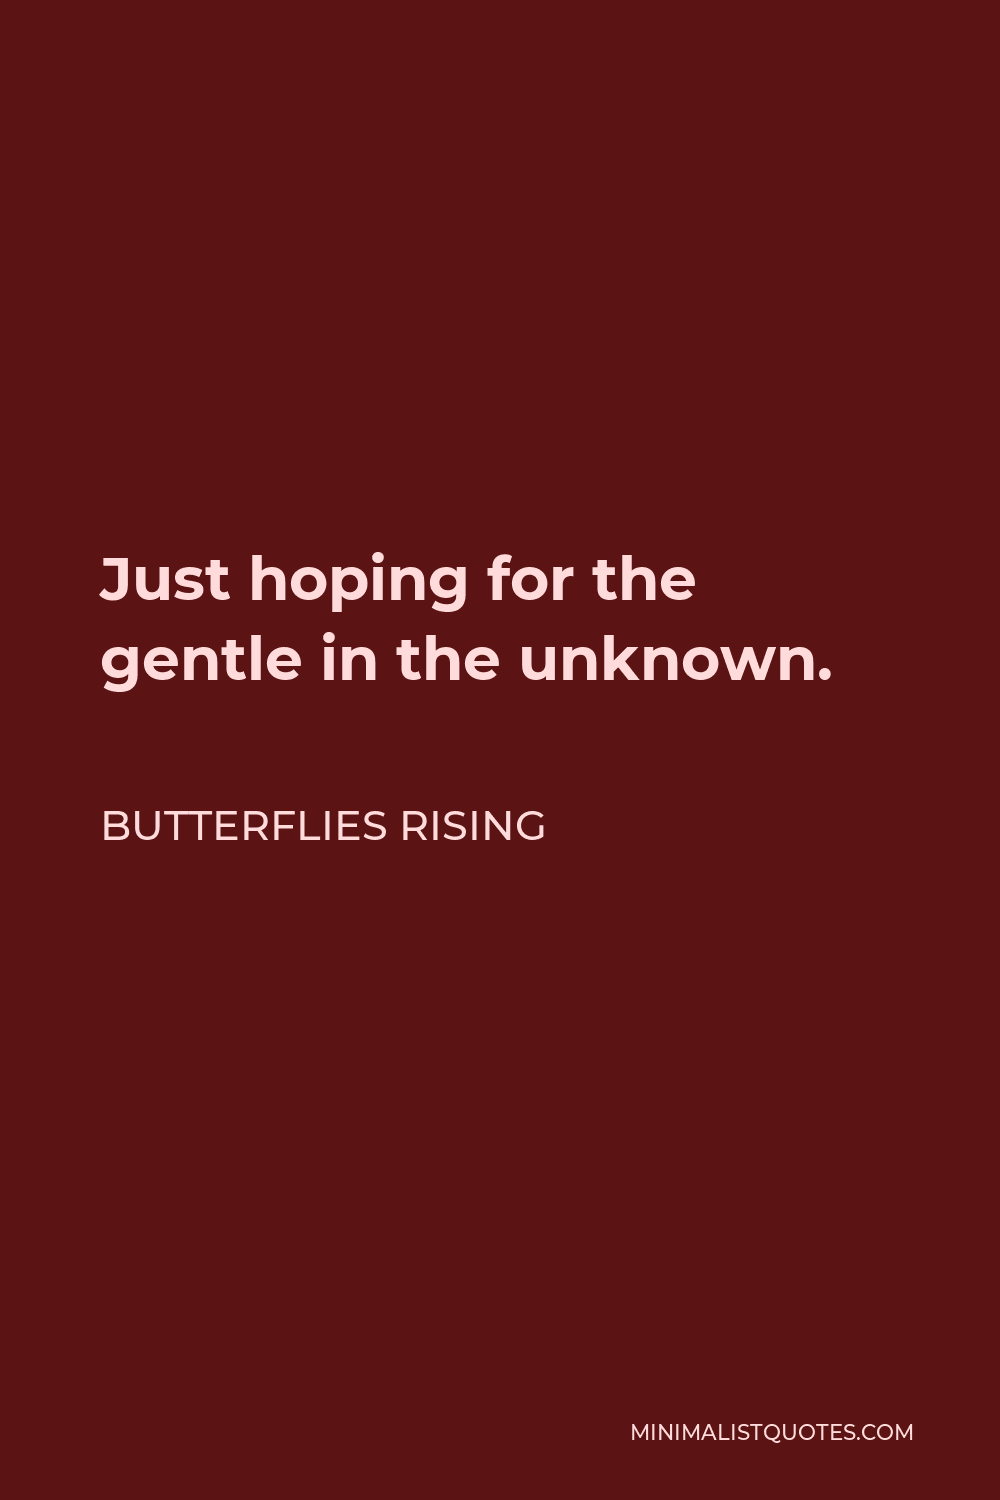 Butterflies Rising Quote - Just hoping for the gentle in the unknown.